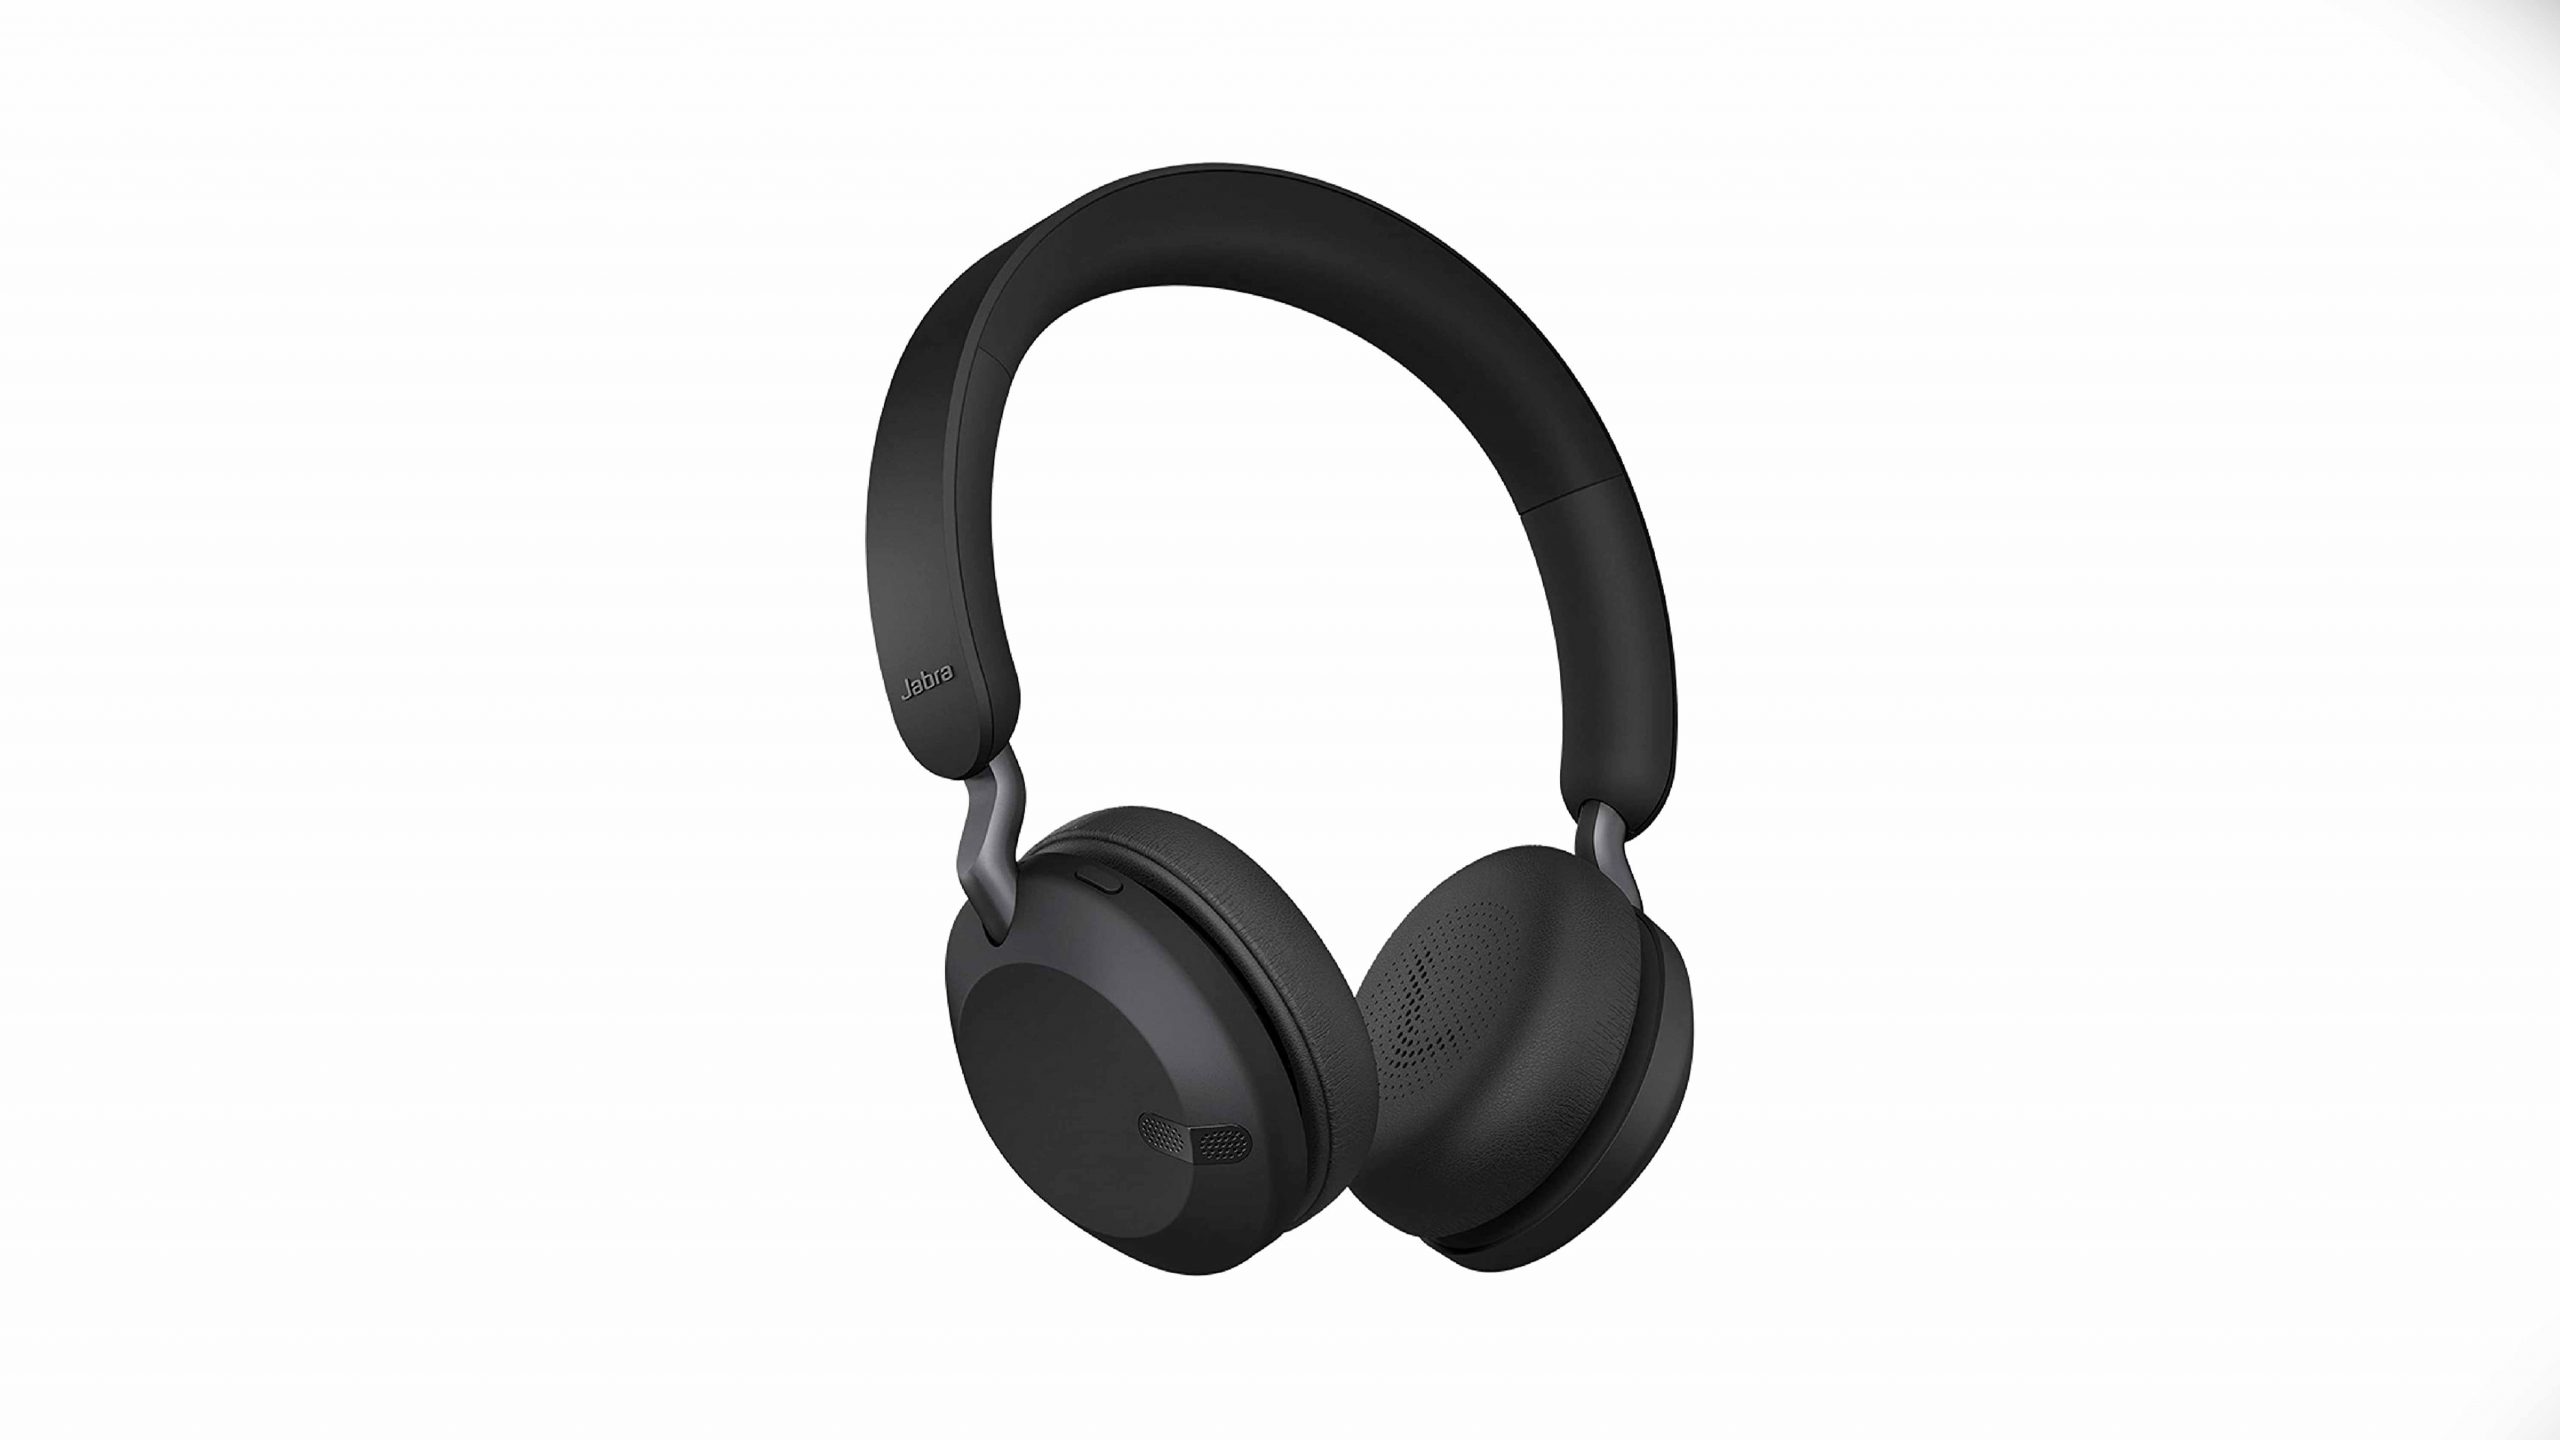 A product render of the Jabra Elite 45h on-ear headphones in black against a white background.